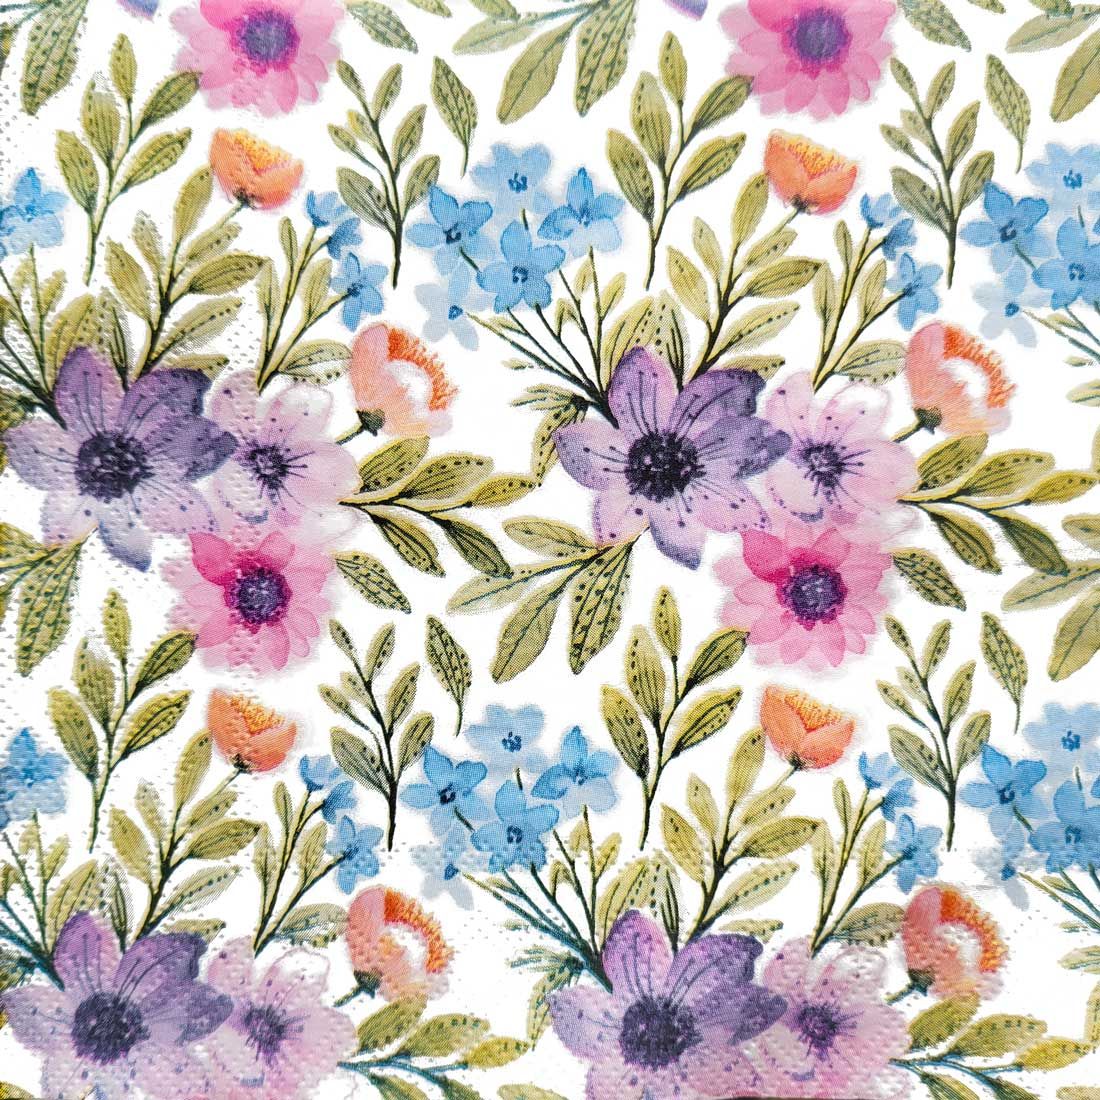 Decoupage Paper Napkins - Floral - Tender Flowers
This decoupage paper napkin features a charming and whimsical floral pattern. Delicate pink, purple, and blue blossoms with varying shades of green leaves create a lively and fresh design against a crisp white background. The watercolor-inspired brushstrokes add a soft and artistic touch to the overall composition, making this napkin perfect for adding a cheerful and decorative element to any decoupage project.